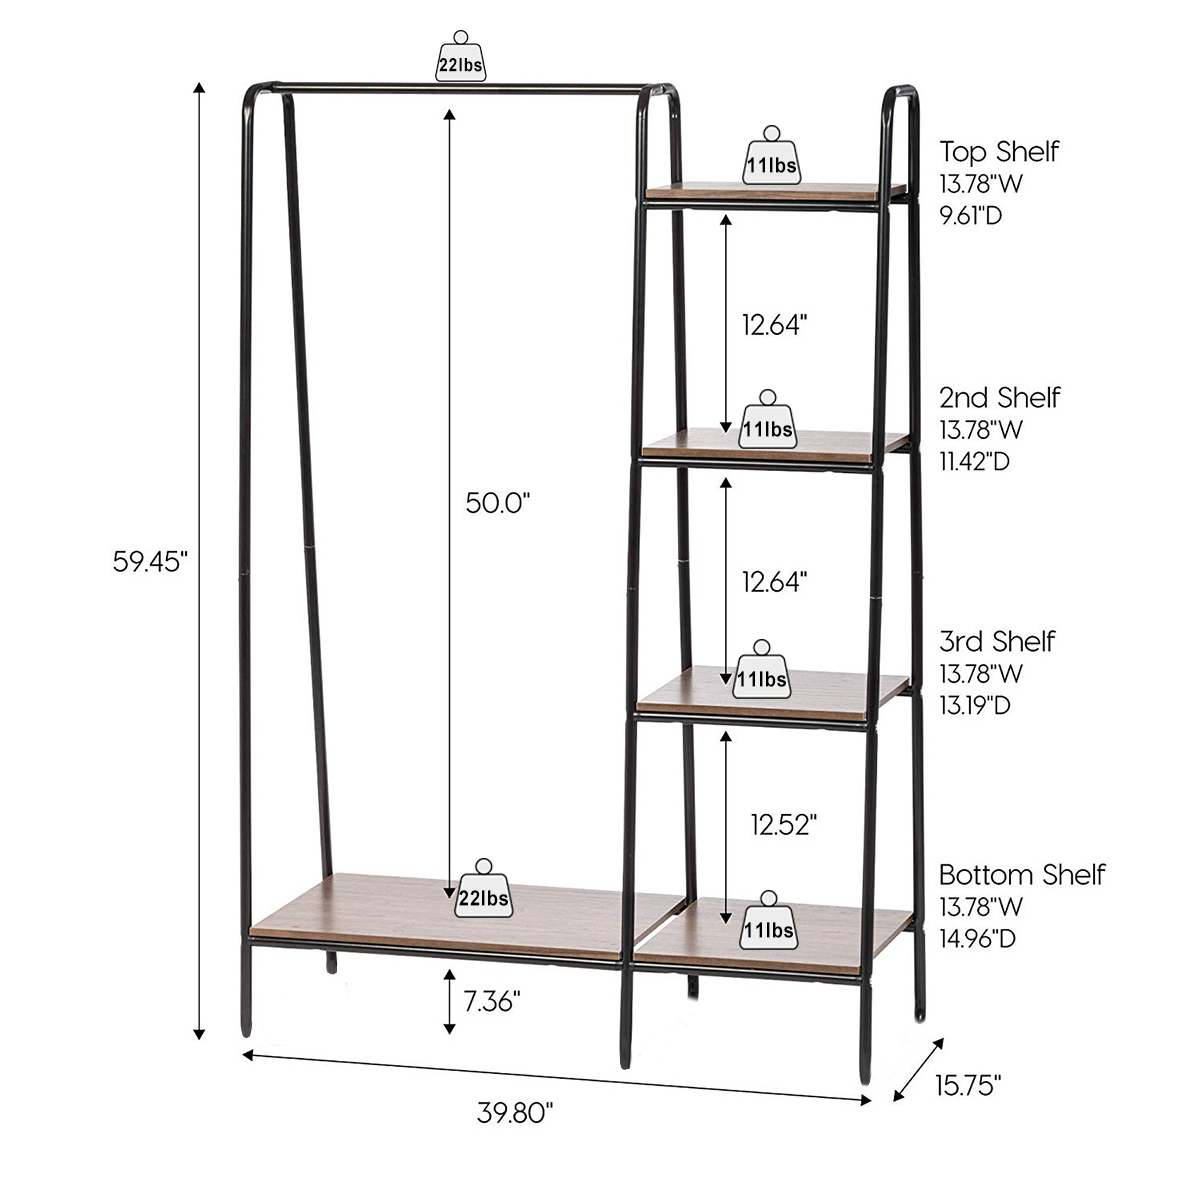 Metal Garment Rack Home Storage Rack Hanging Clothing Bar with Multi Wooden Shelves 60" x 40" - image 2 of 12